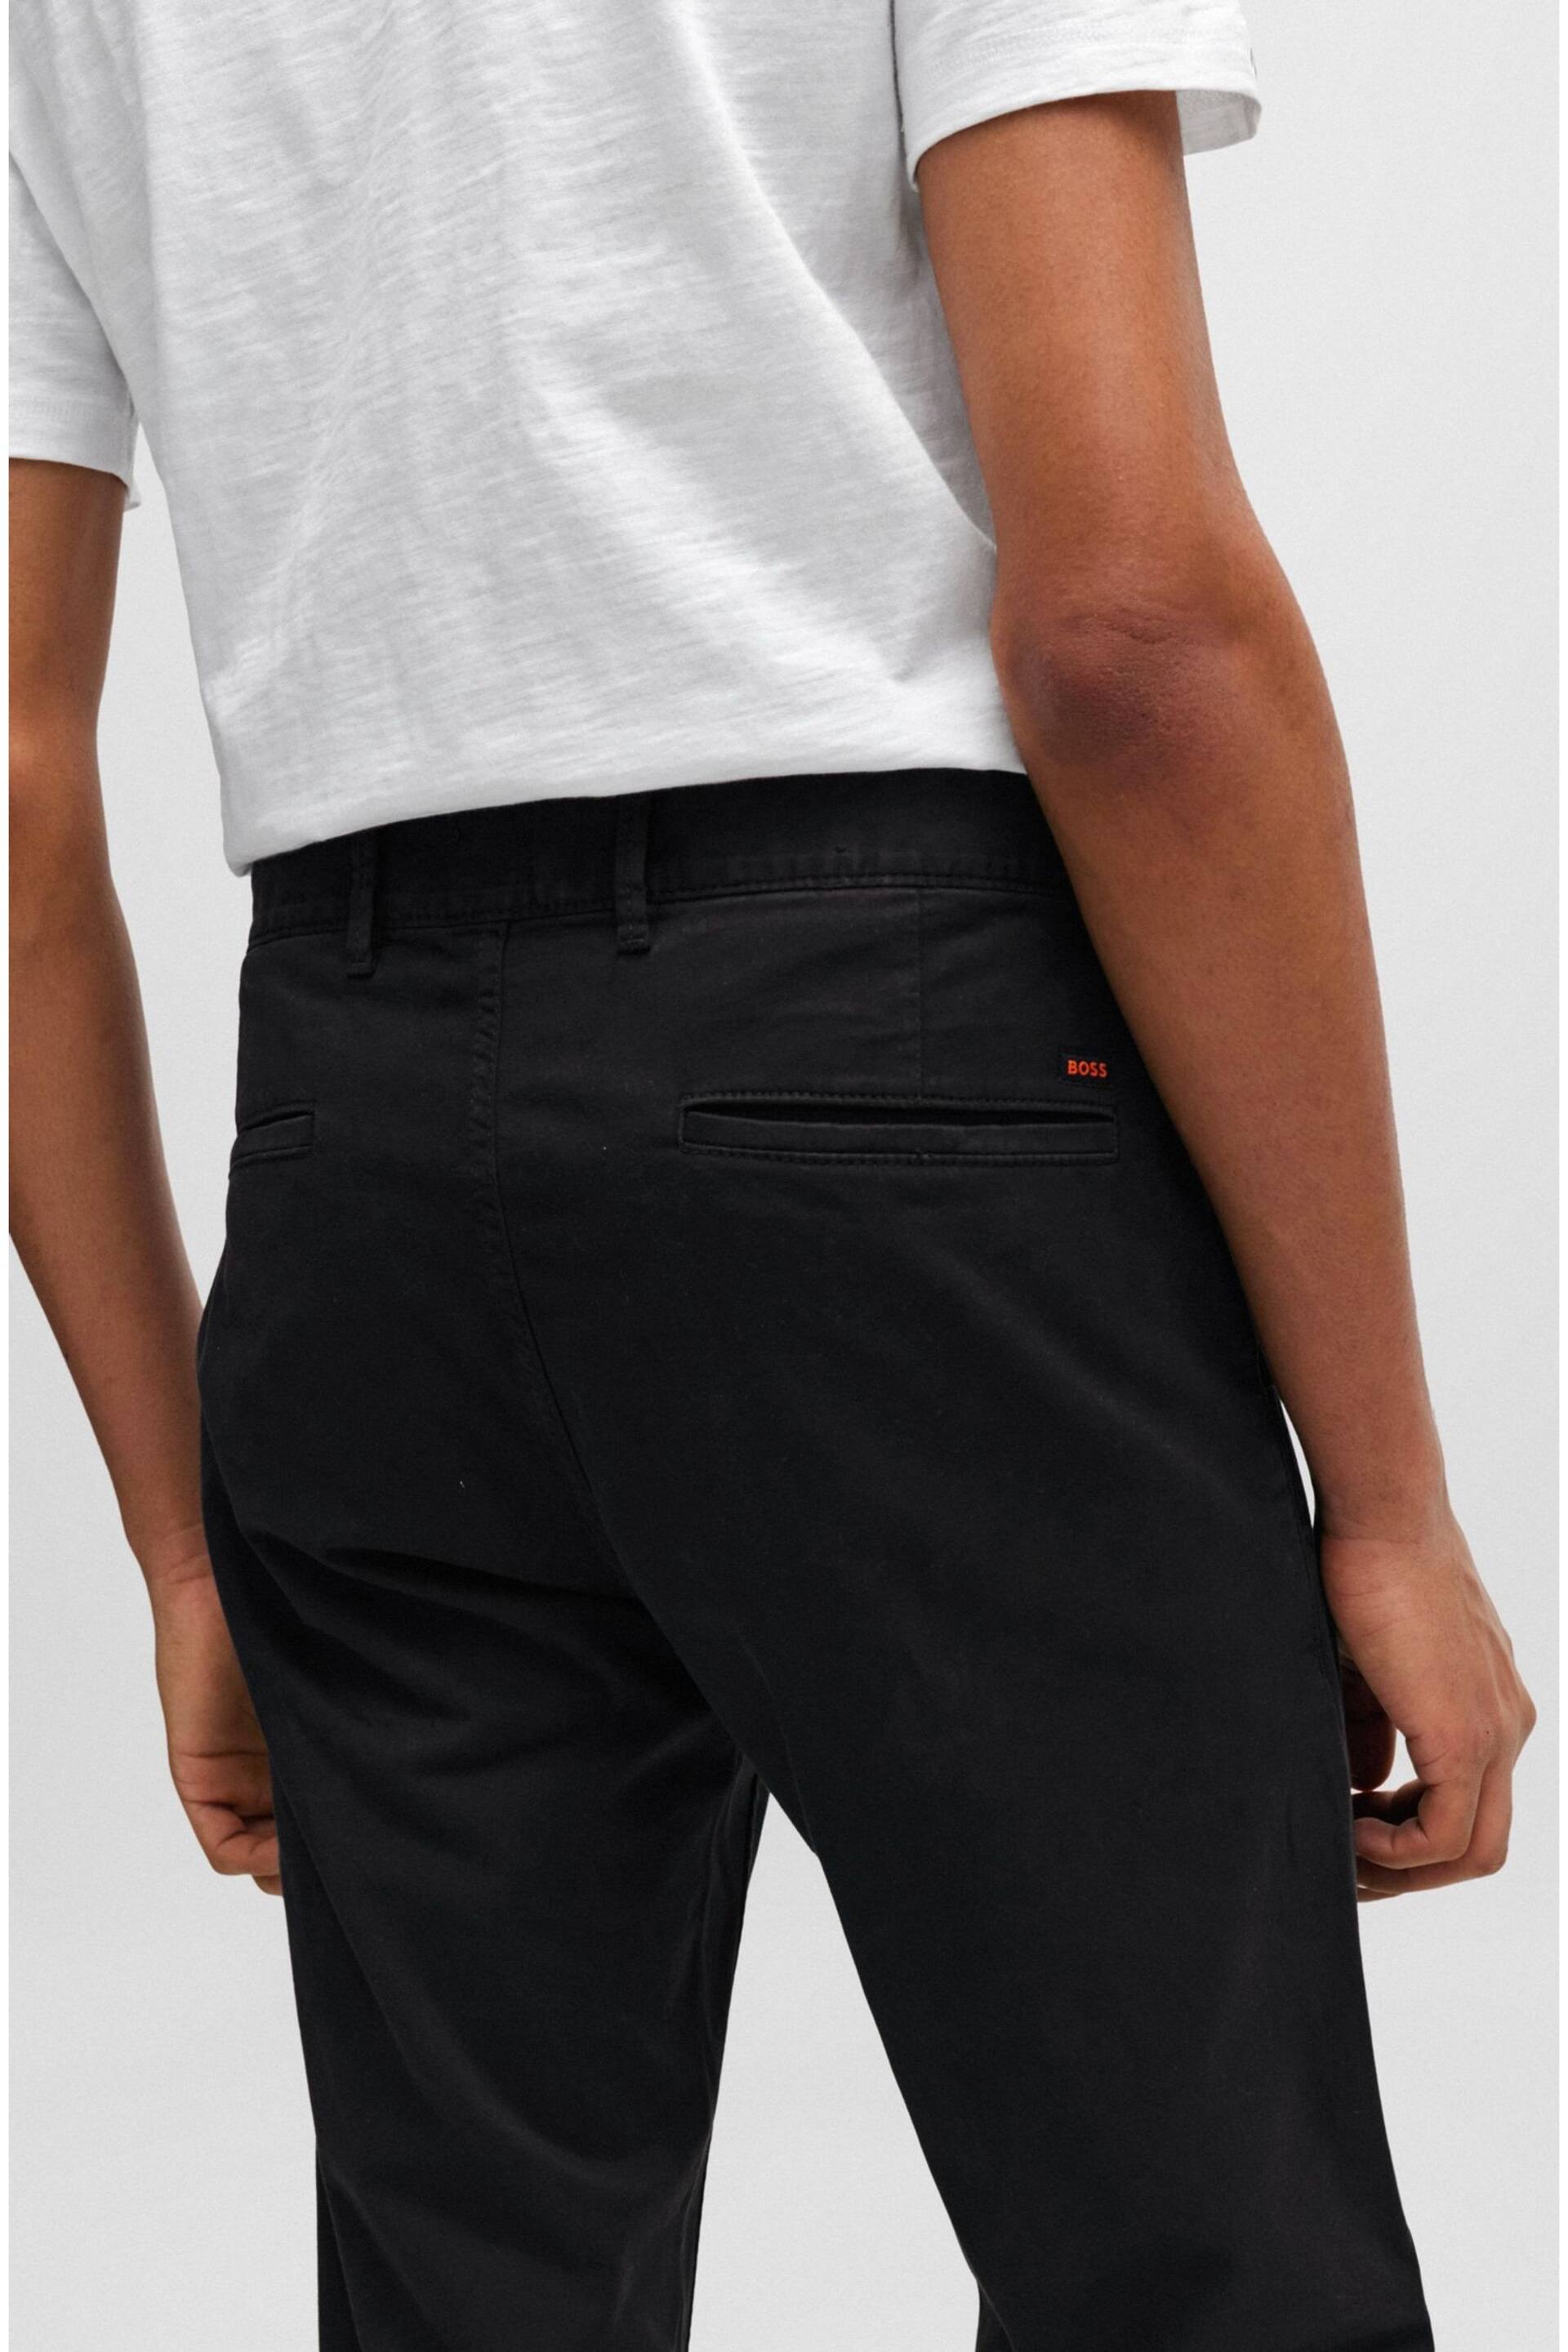 BOSS Black Slim Fit Stretch Cotton Trousers - Image 4 of 5